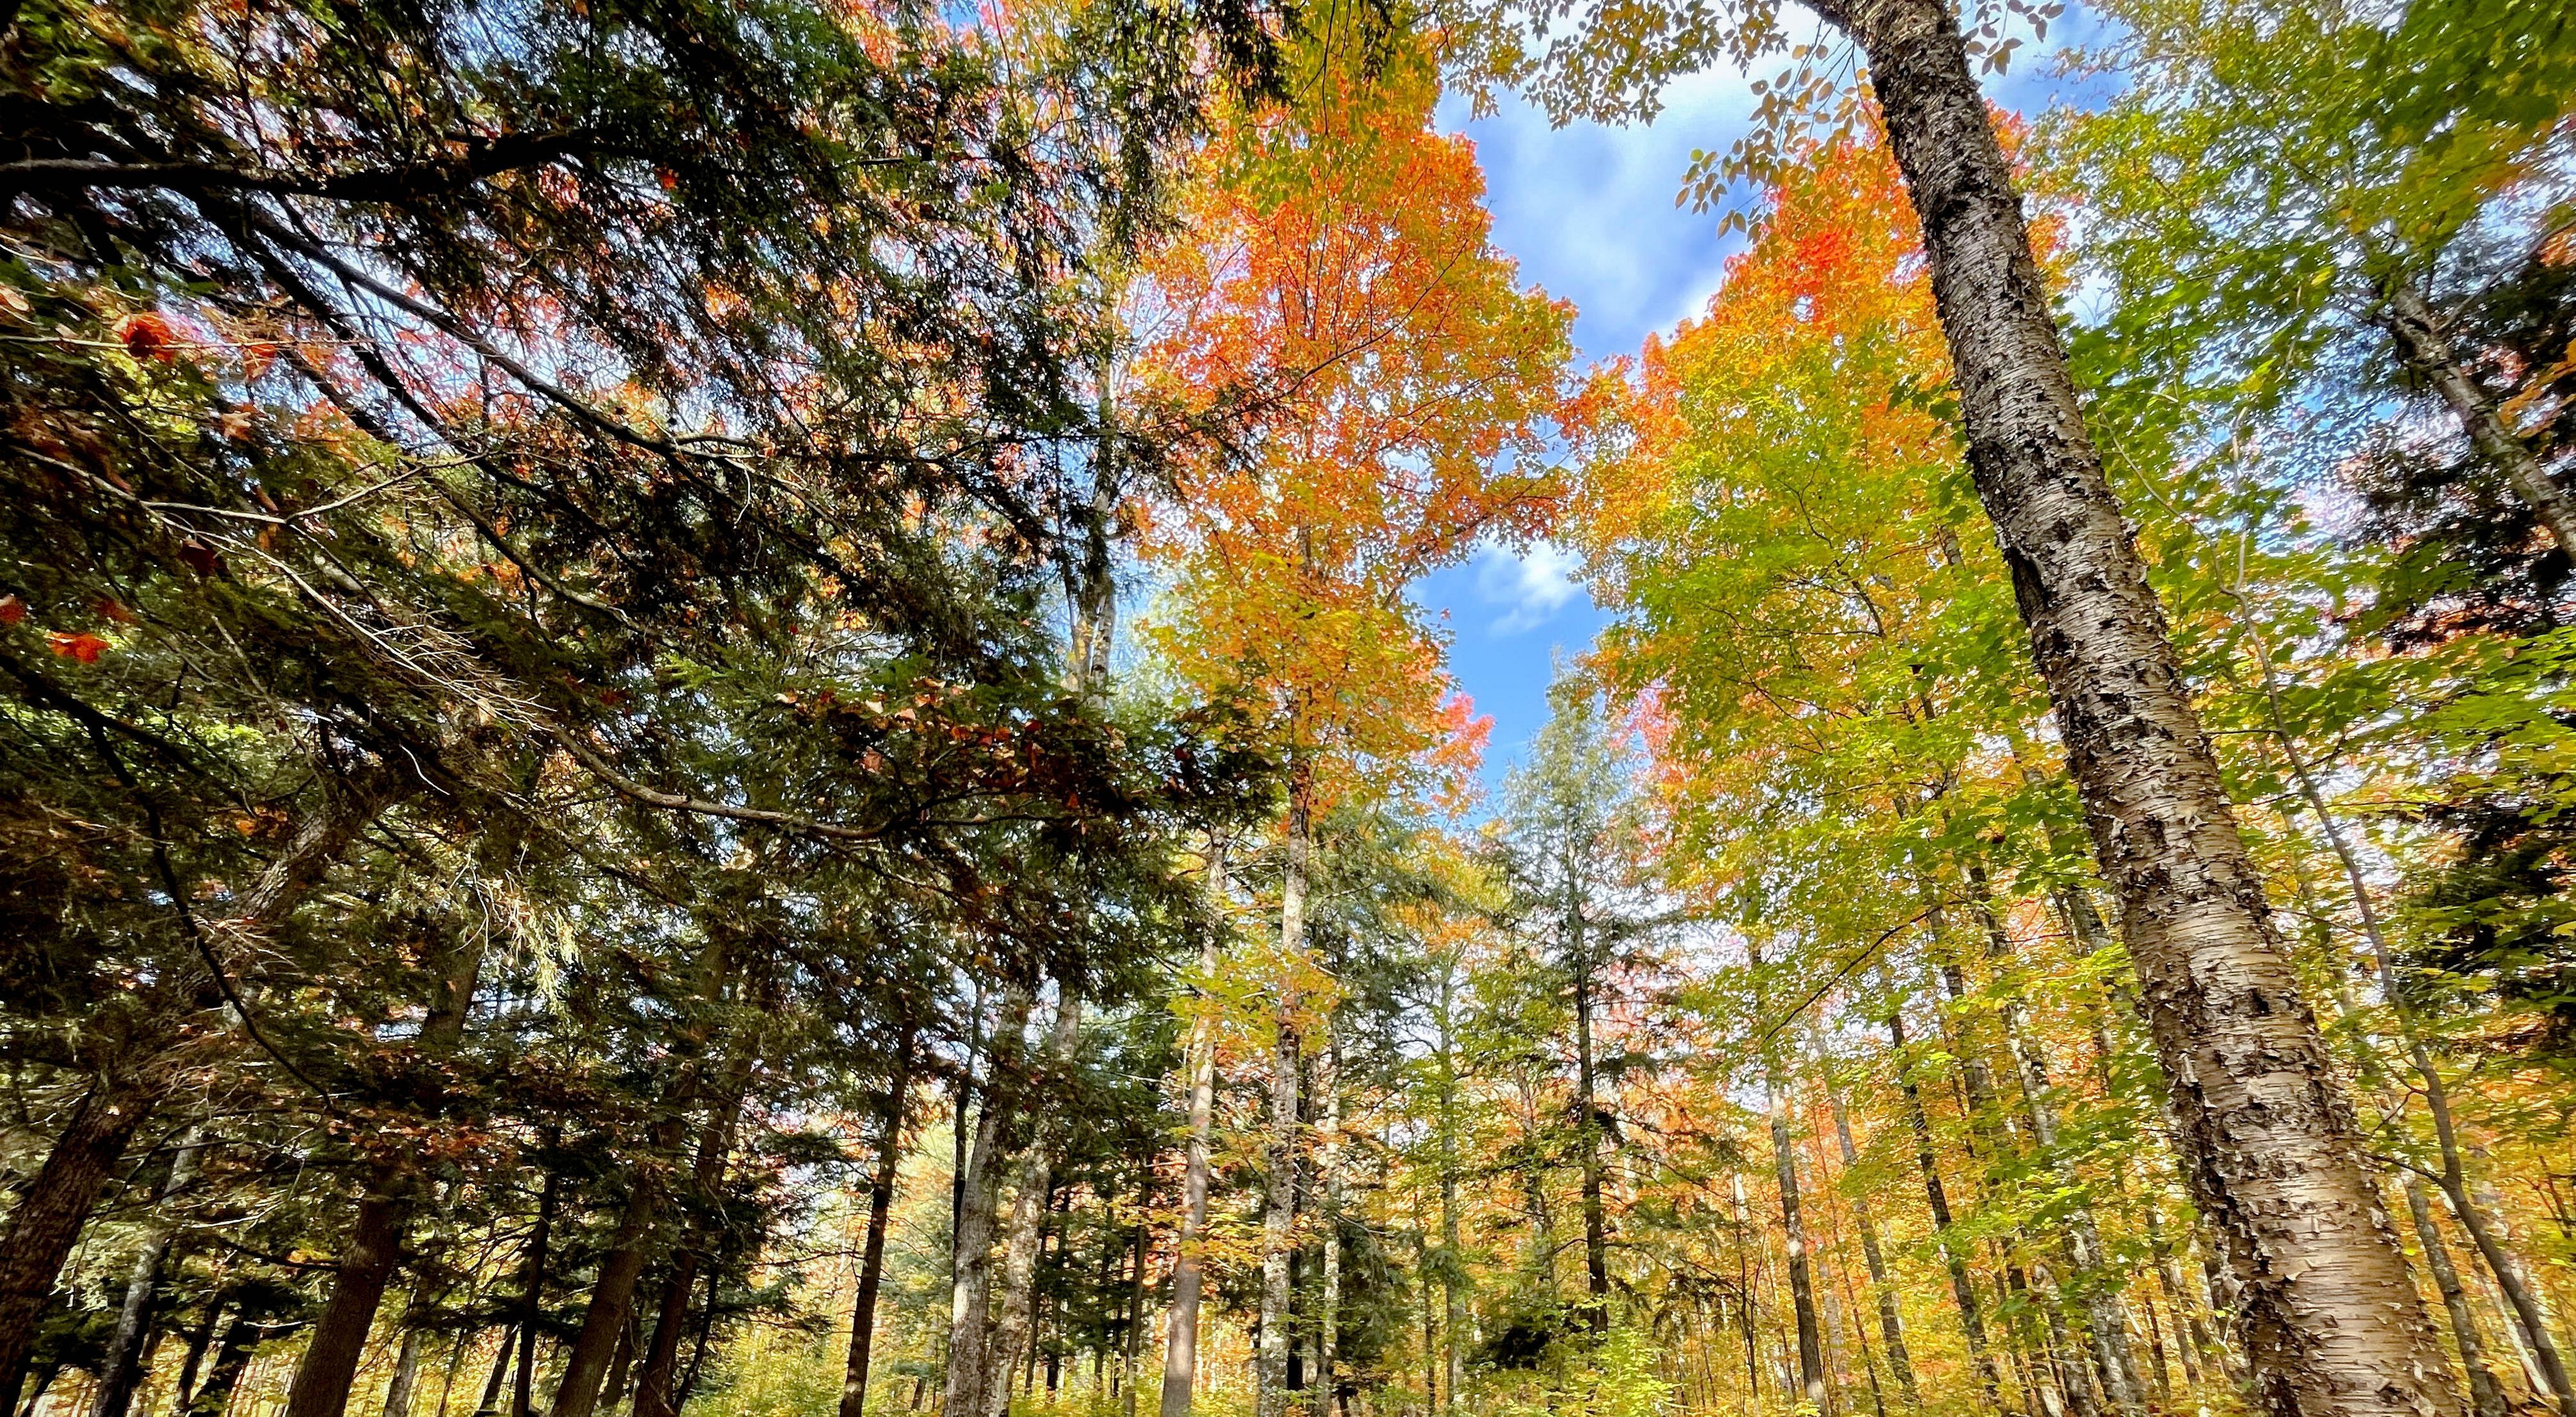 A fall-colored forest with a variety of trees and blue sky above.